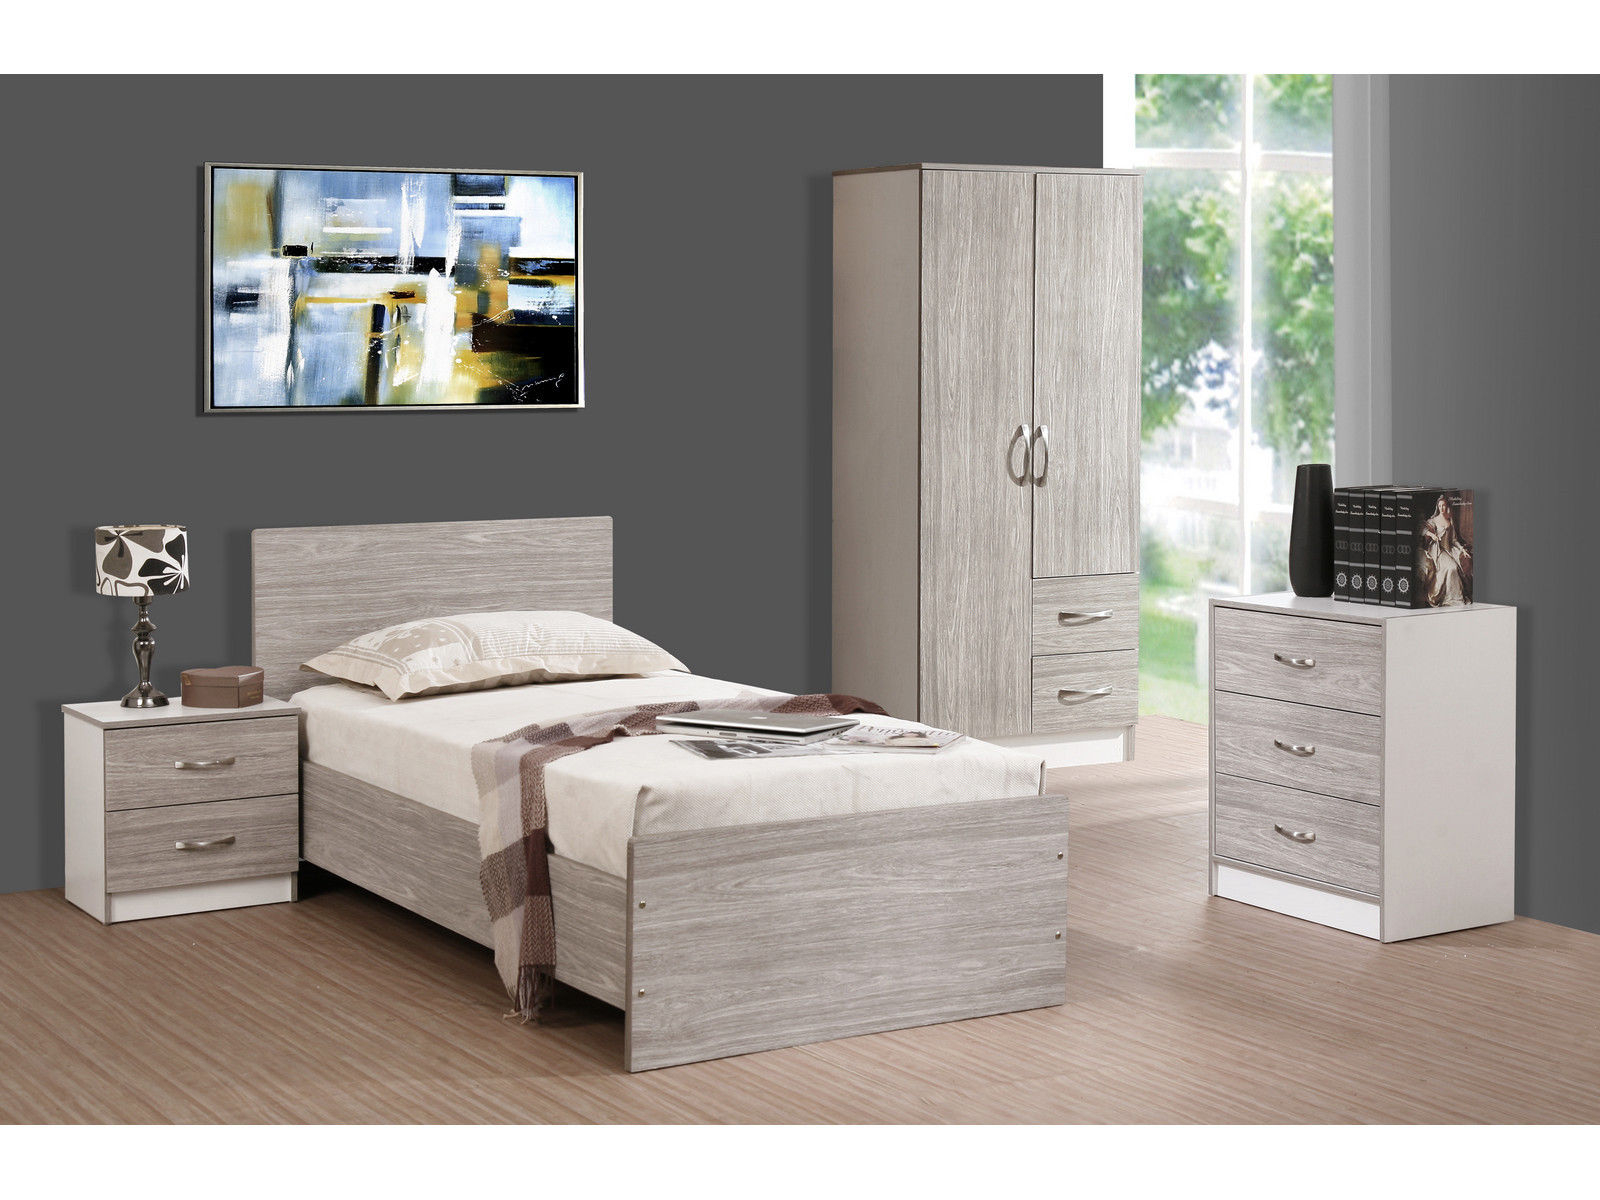 Details About Grey Oak White 3 Piece Bedroom Furniture Set Marina High Gloss Range throughout measurements 1600 X 1200